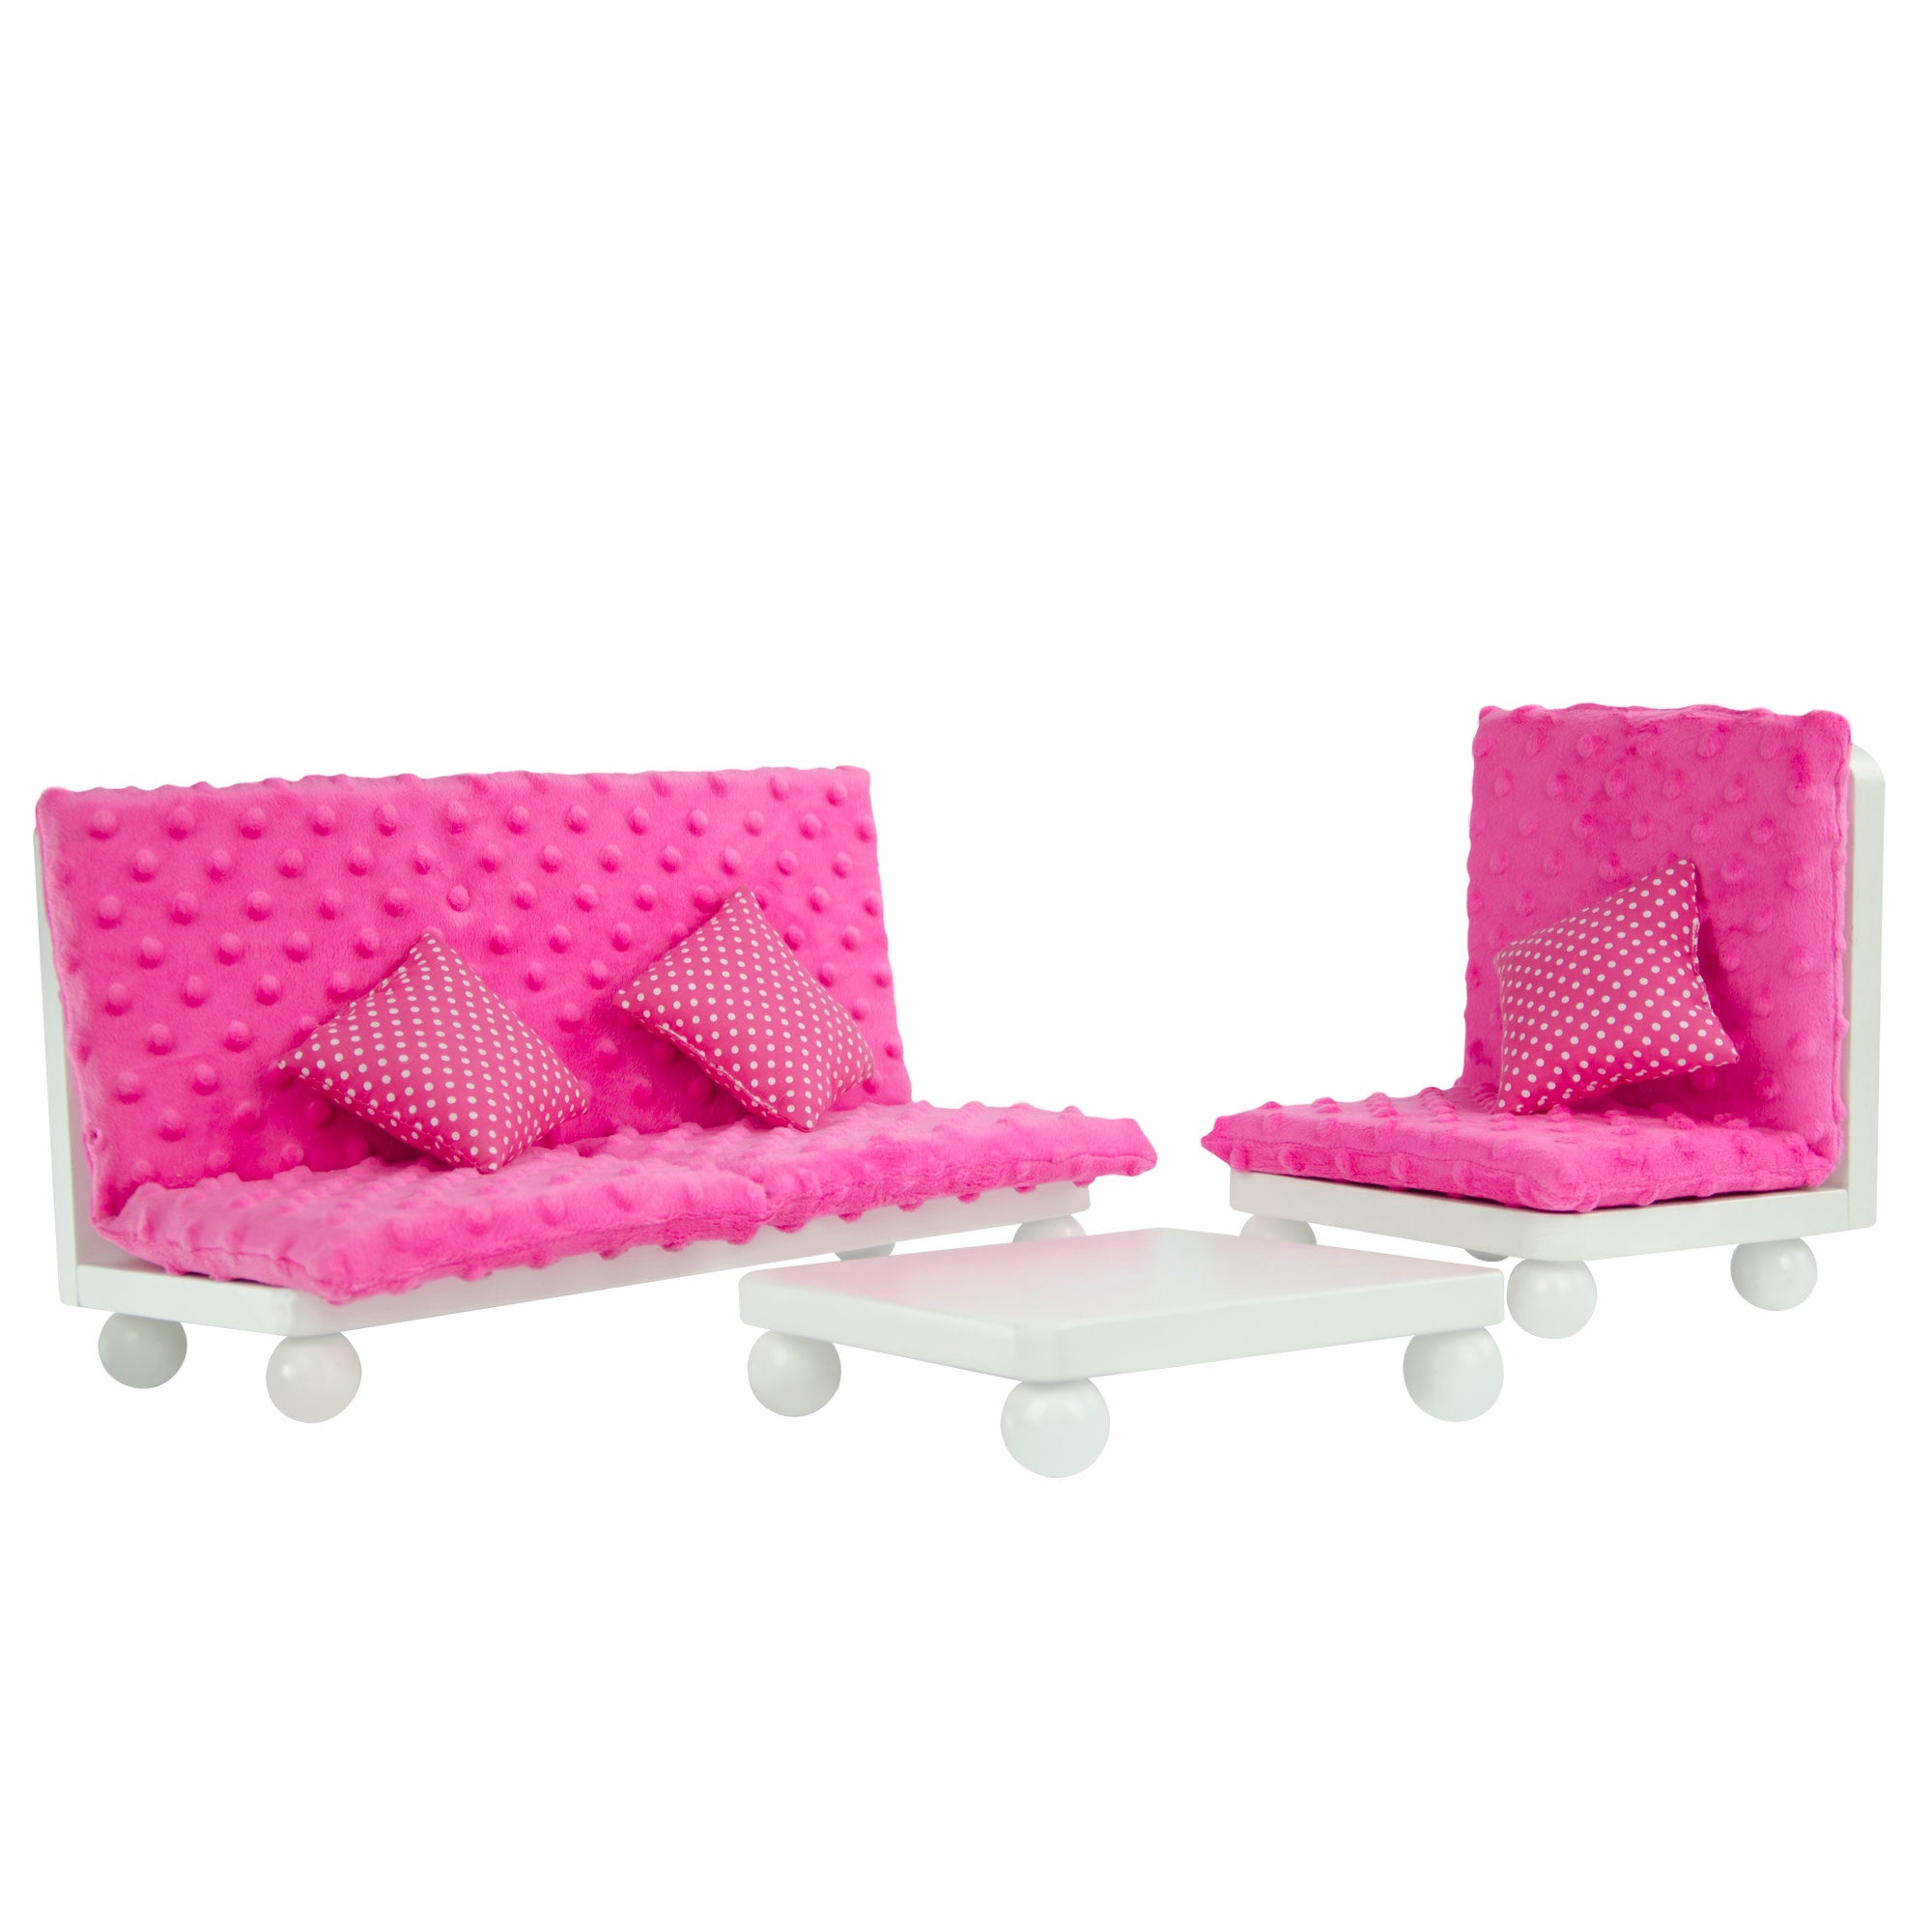 Olivia's Little World Little Princess Lounge Set with Couch, Chair and Coffee Table, Hot Pink/White